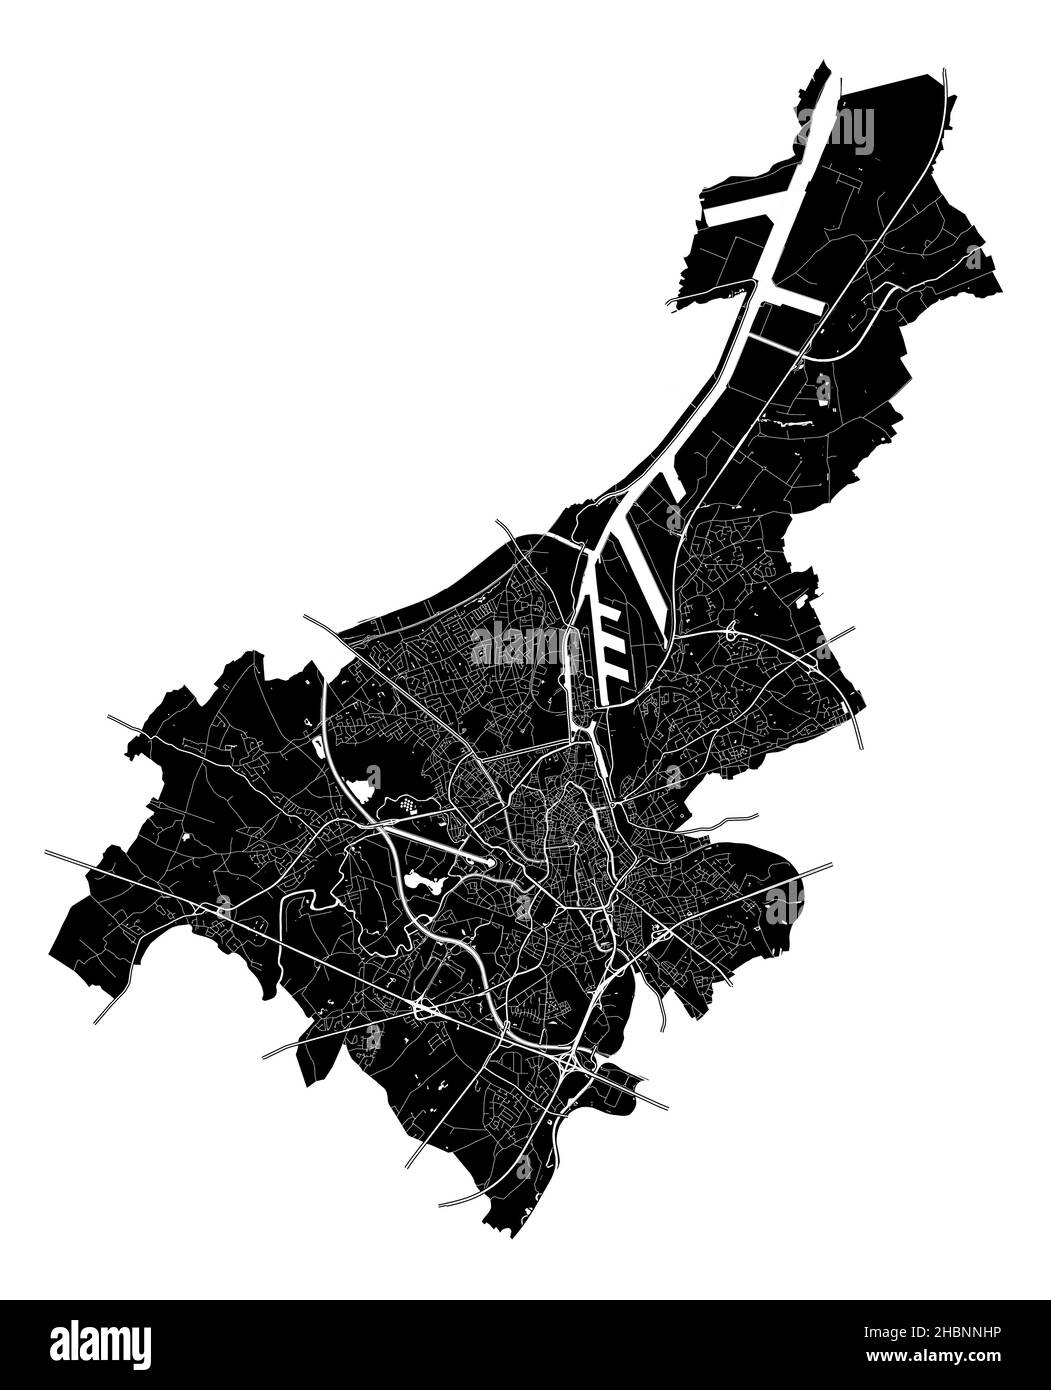 Ghent , Belgium, high resolution vector map with city boundaries, and editable paths. The city map was drawn with white areas and lines for main roads Stock Vector